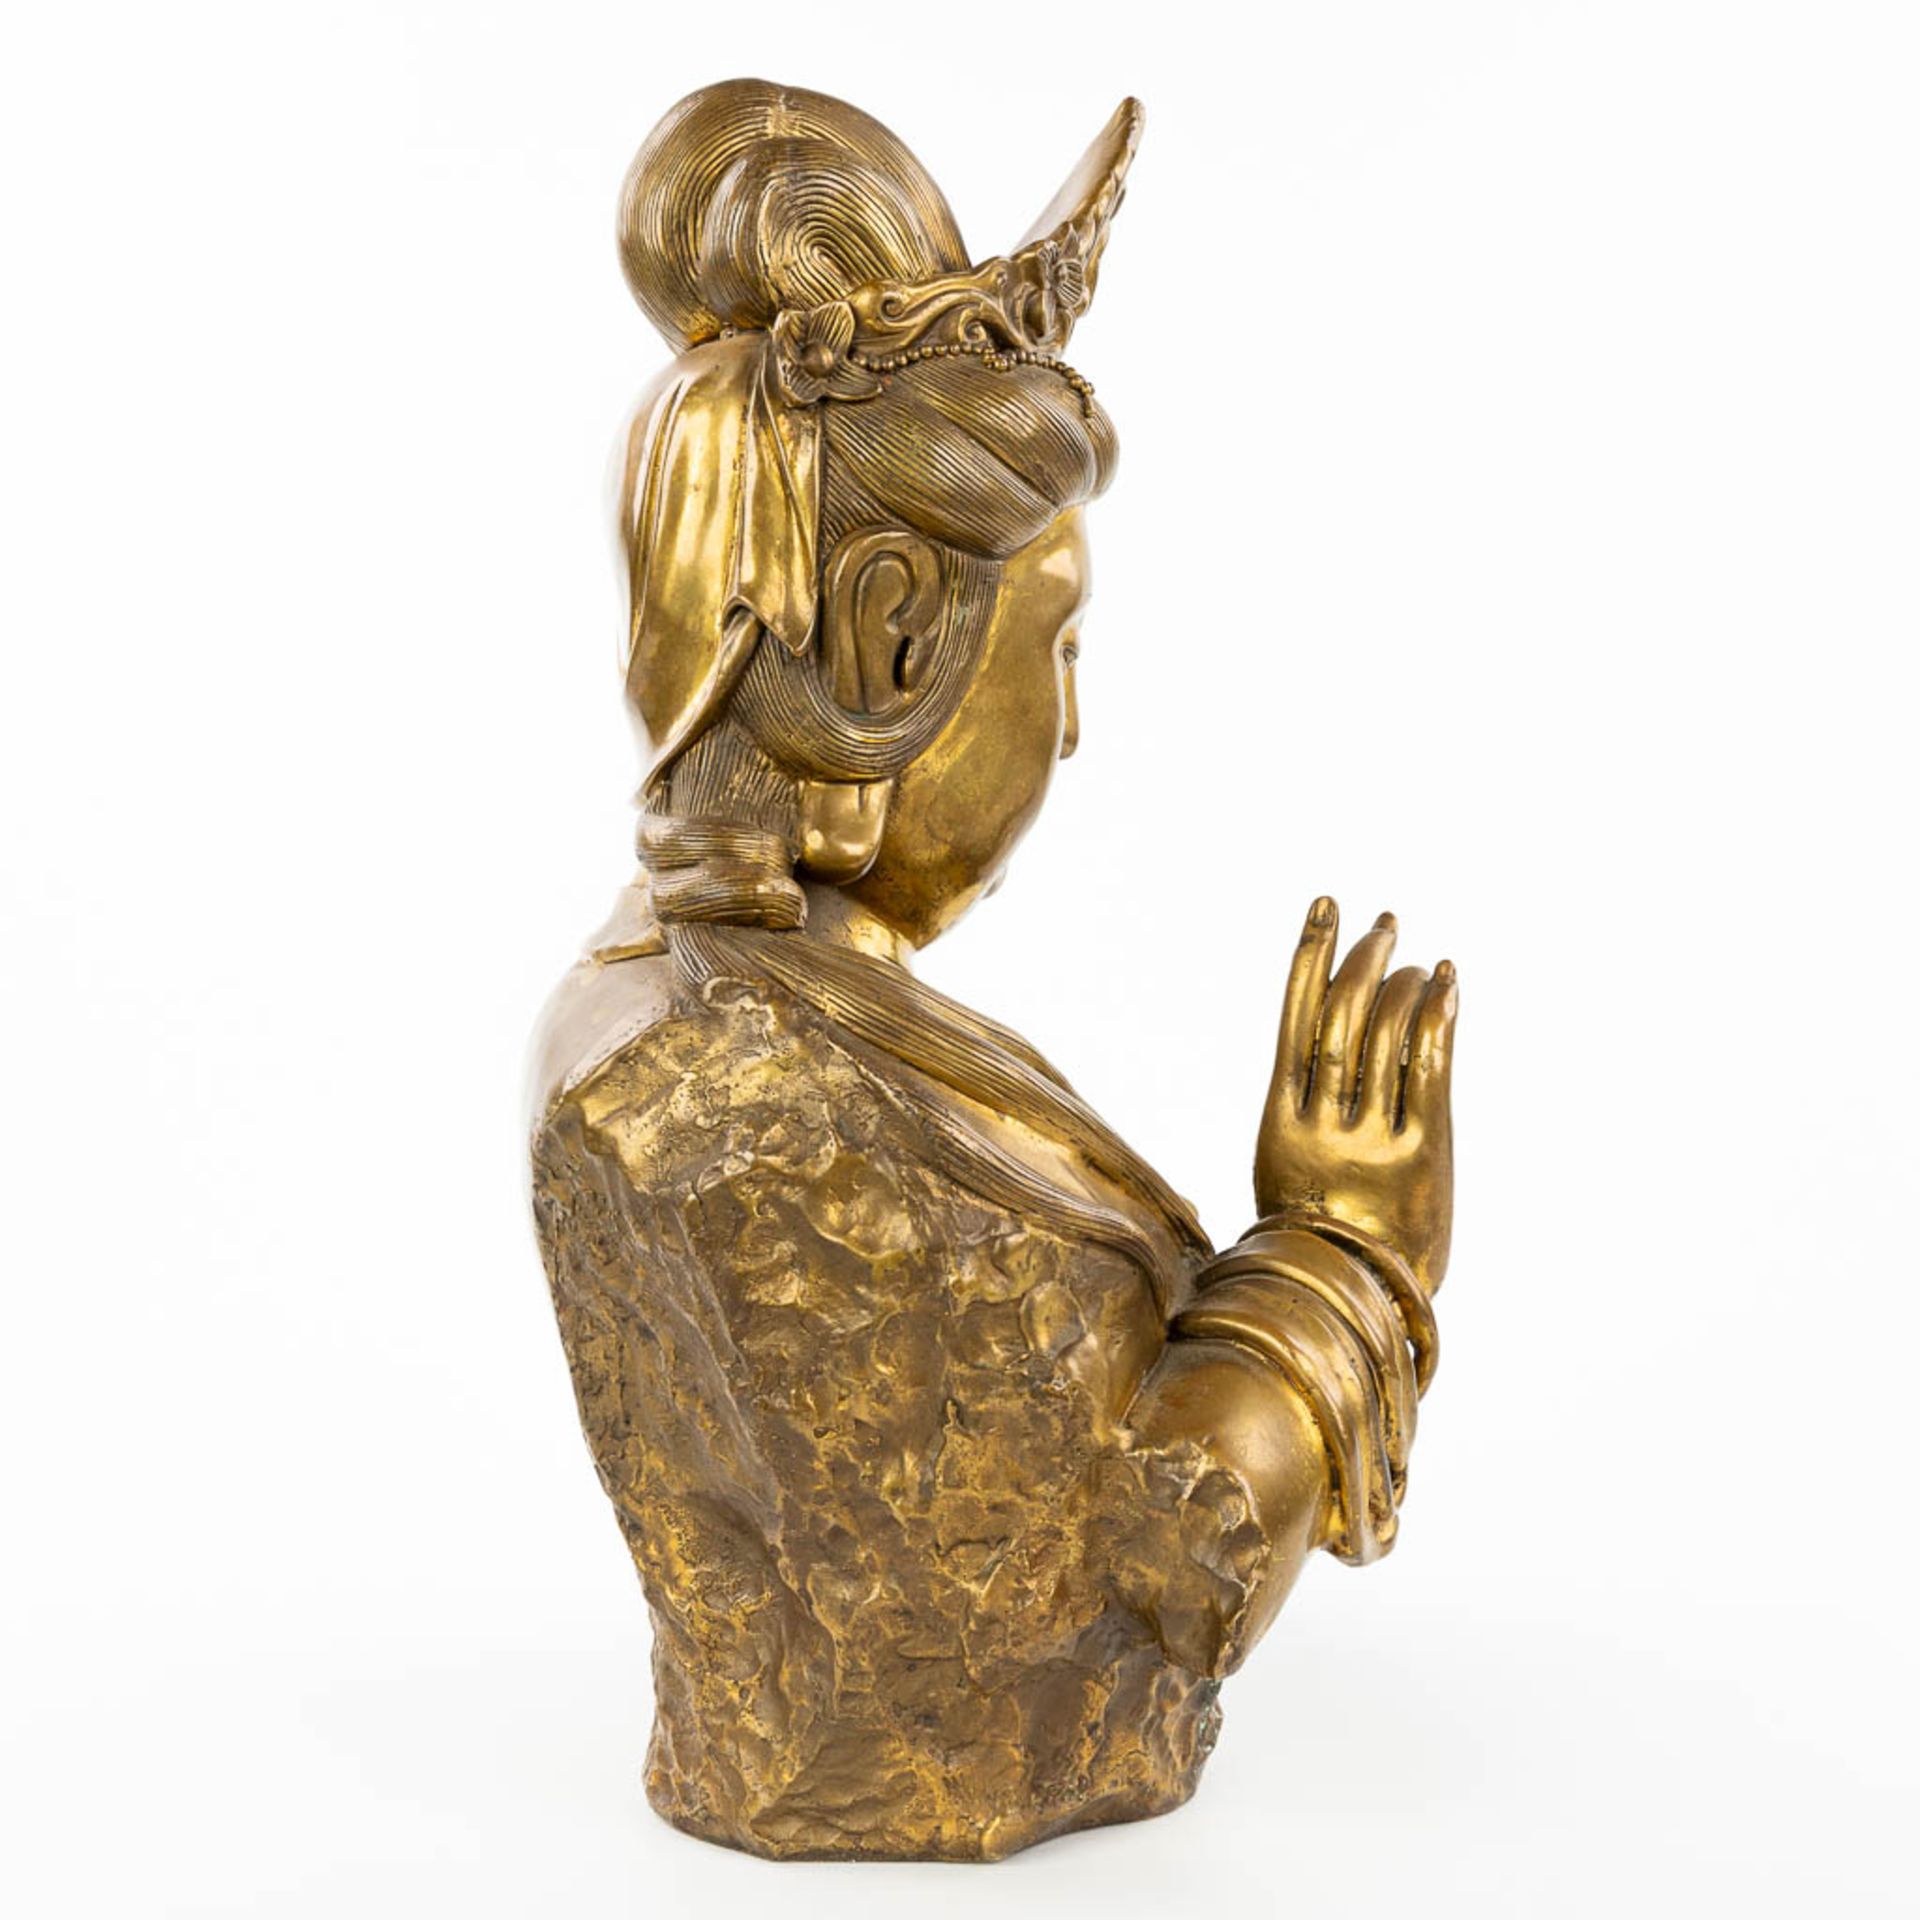 A figurine of Guanyin made of bronze. (H:43cm) - Image 9 of 10